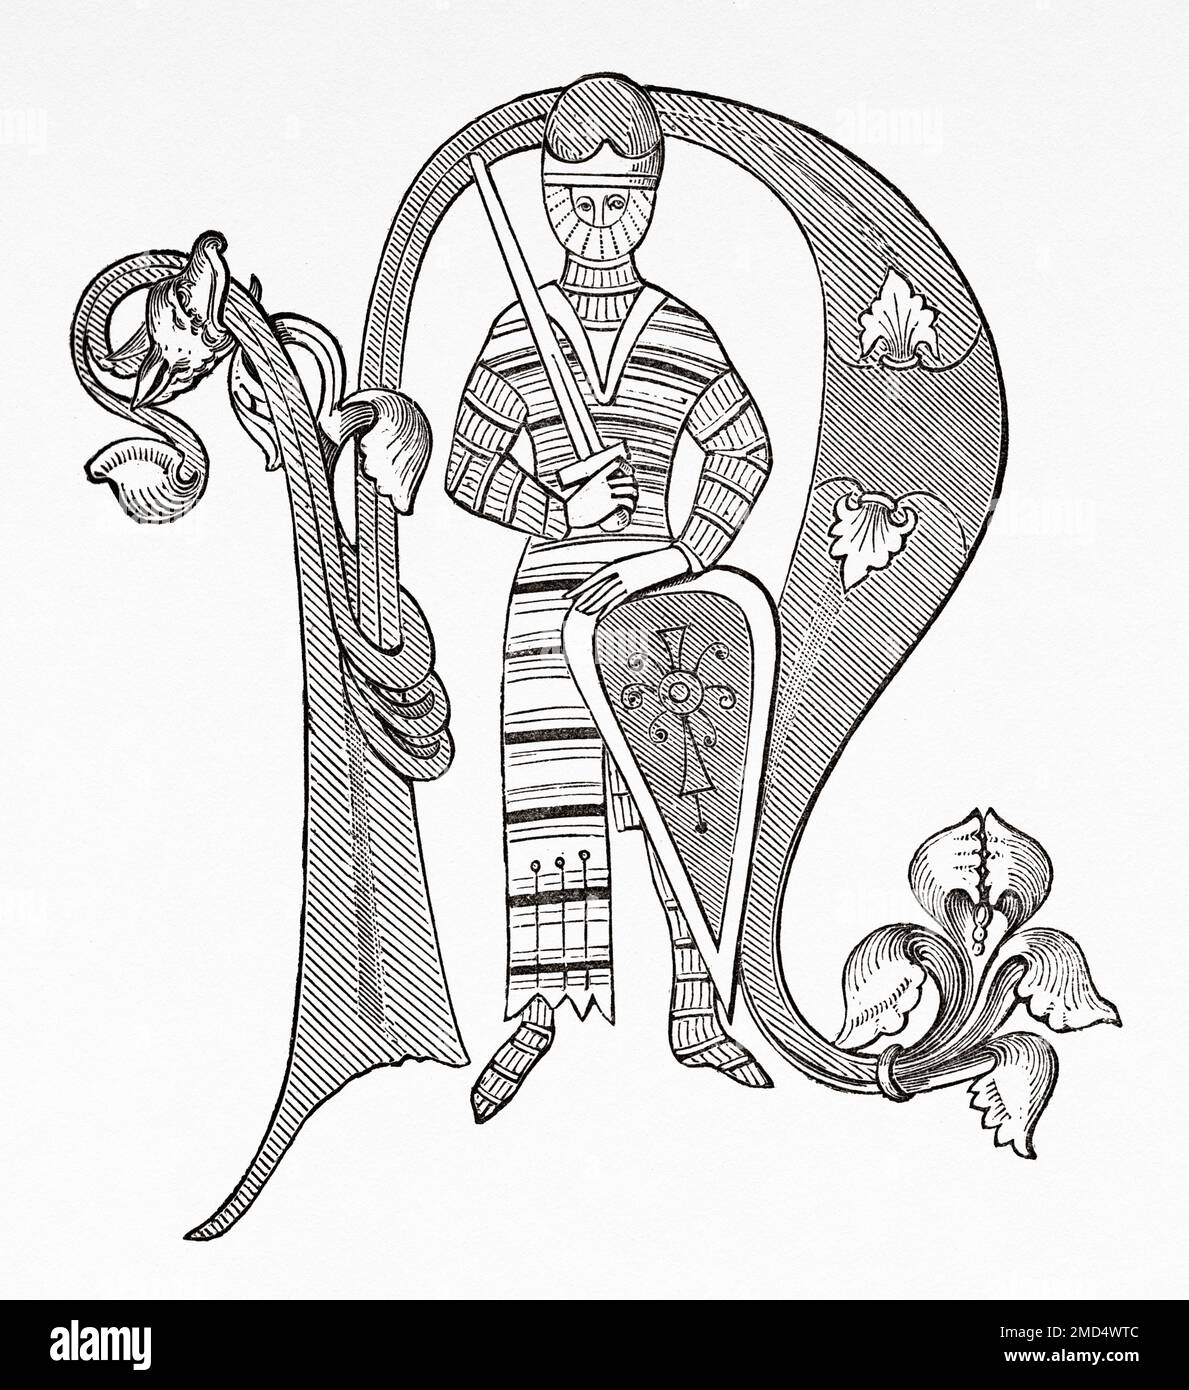 Middle ages initial capital letter N, depicting a knight. The Arts of the Middle Ages and at the Period of the Renaissance by Paul Lacroix, 1874 Stock Photo